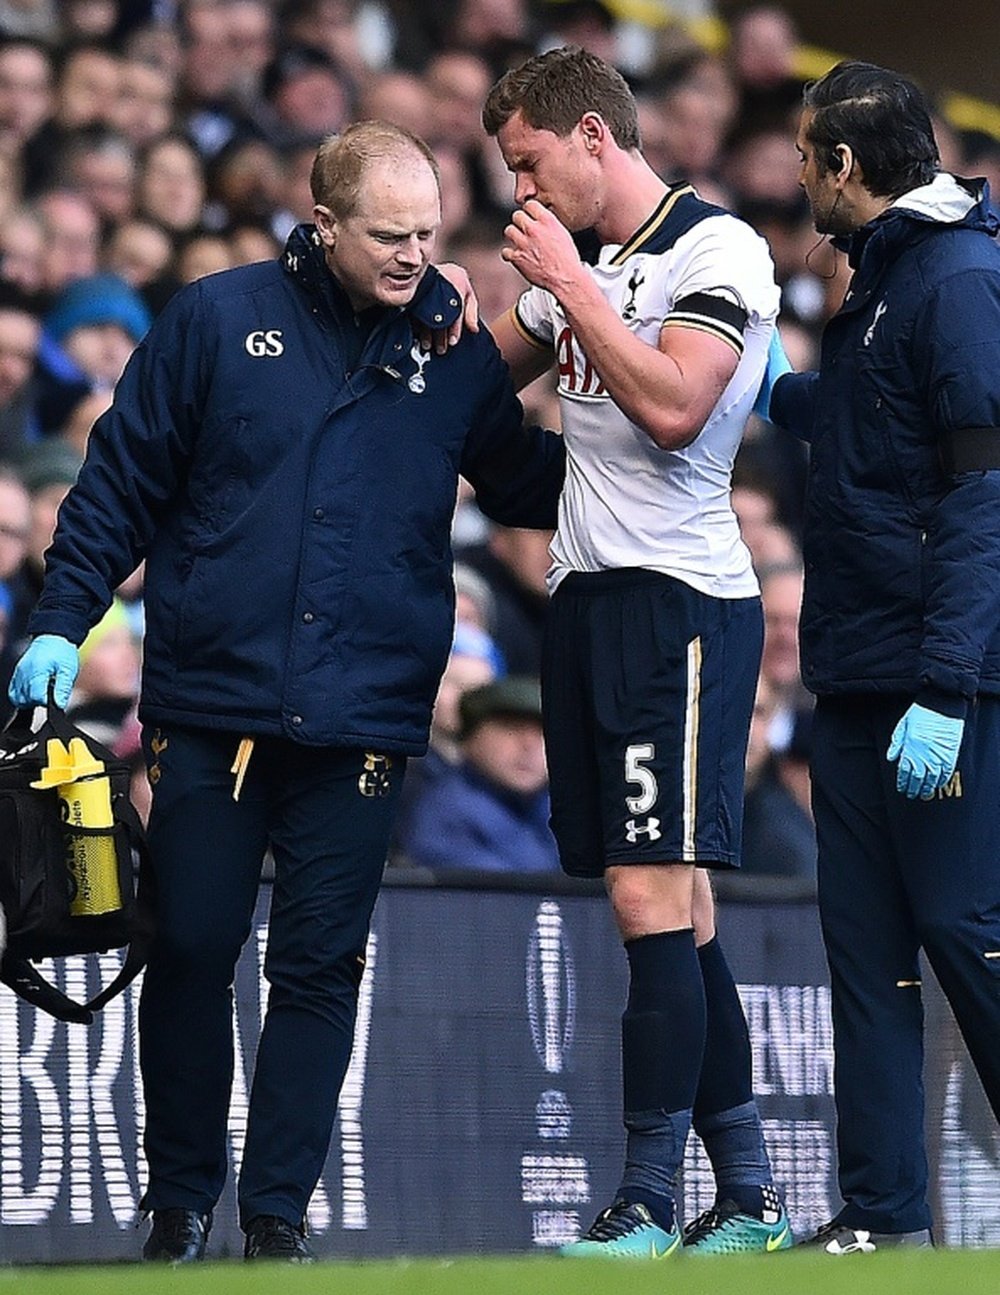 Vertonghen picked up the injury in Saturday's match. AFP